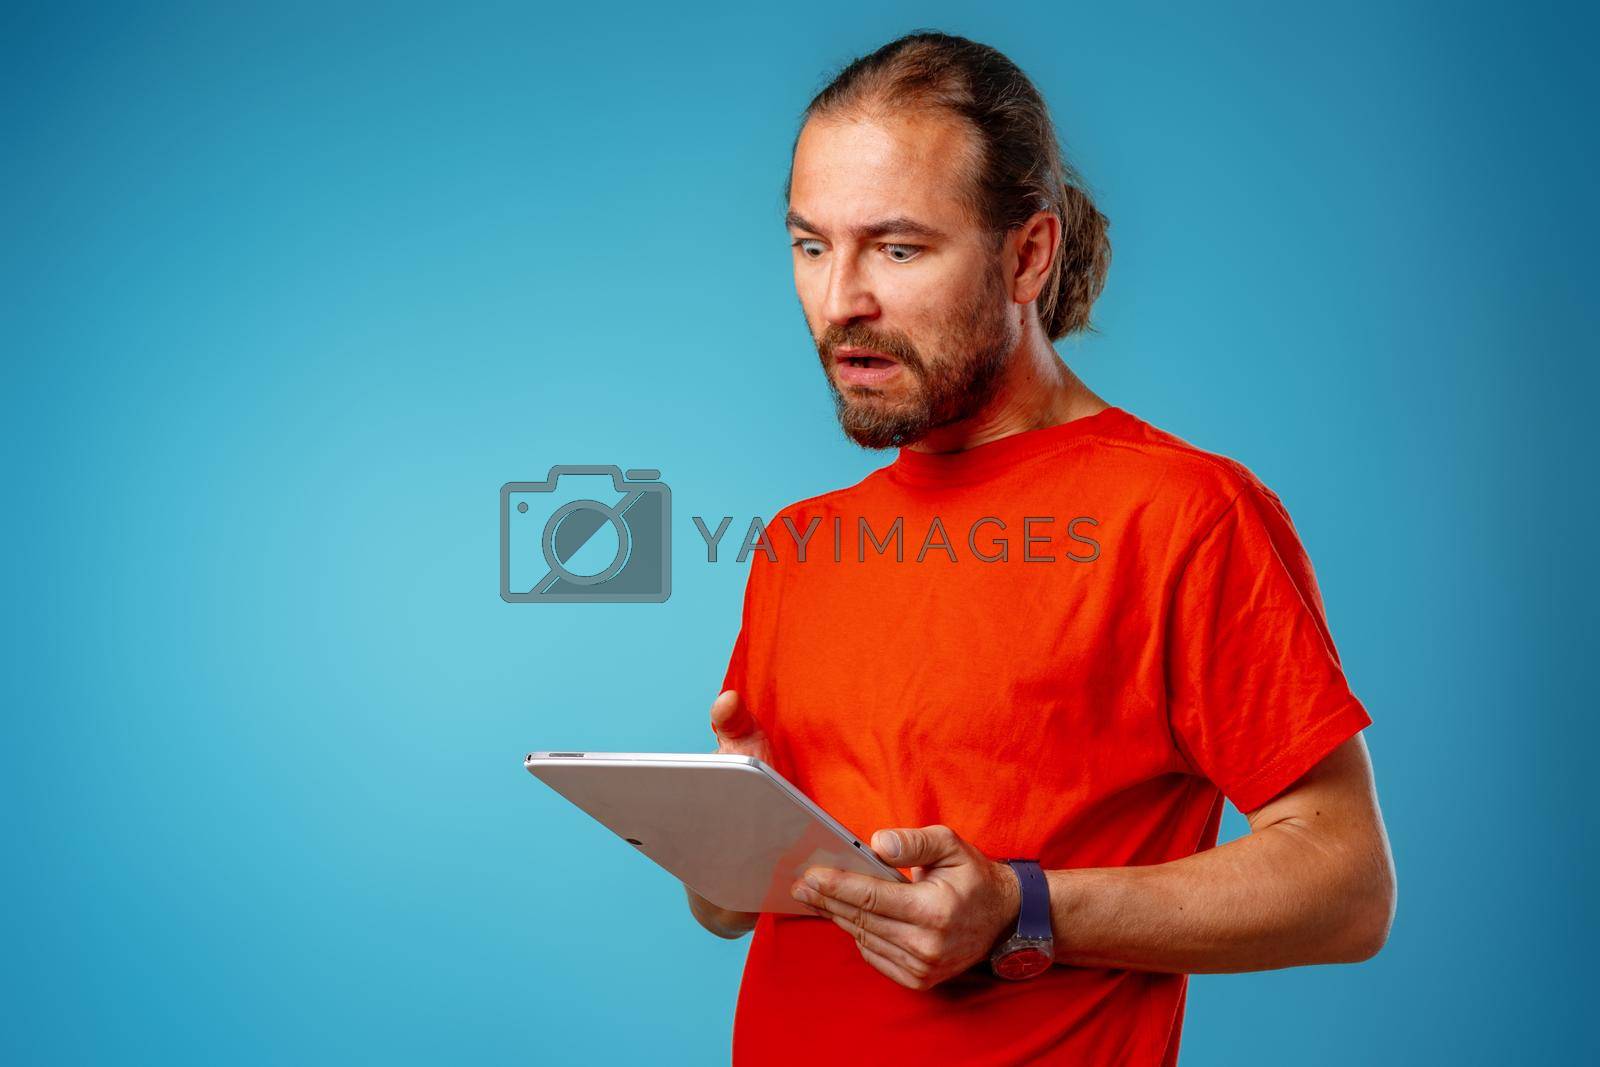 Royalty free image of Funny hipster man using his digital tablet by Fabrikasimf